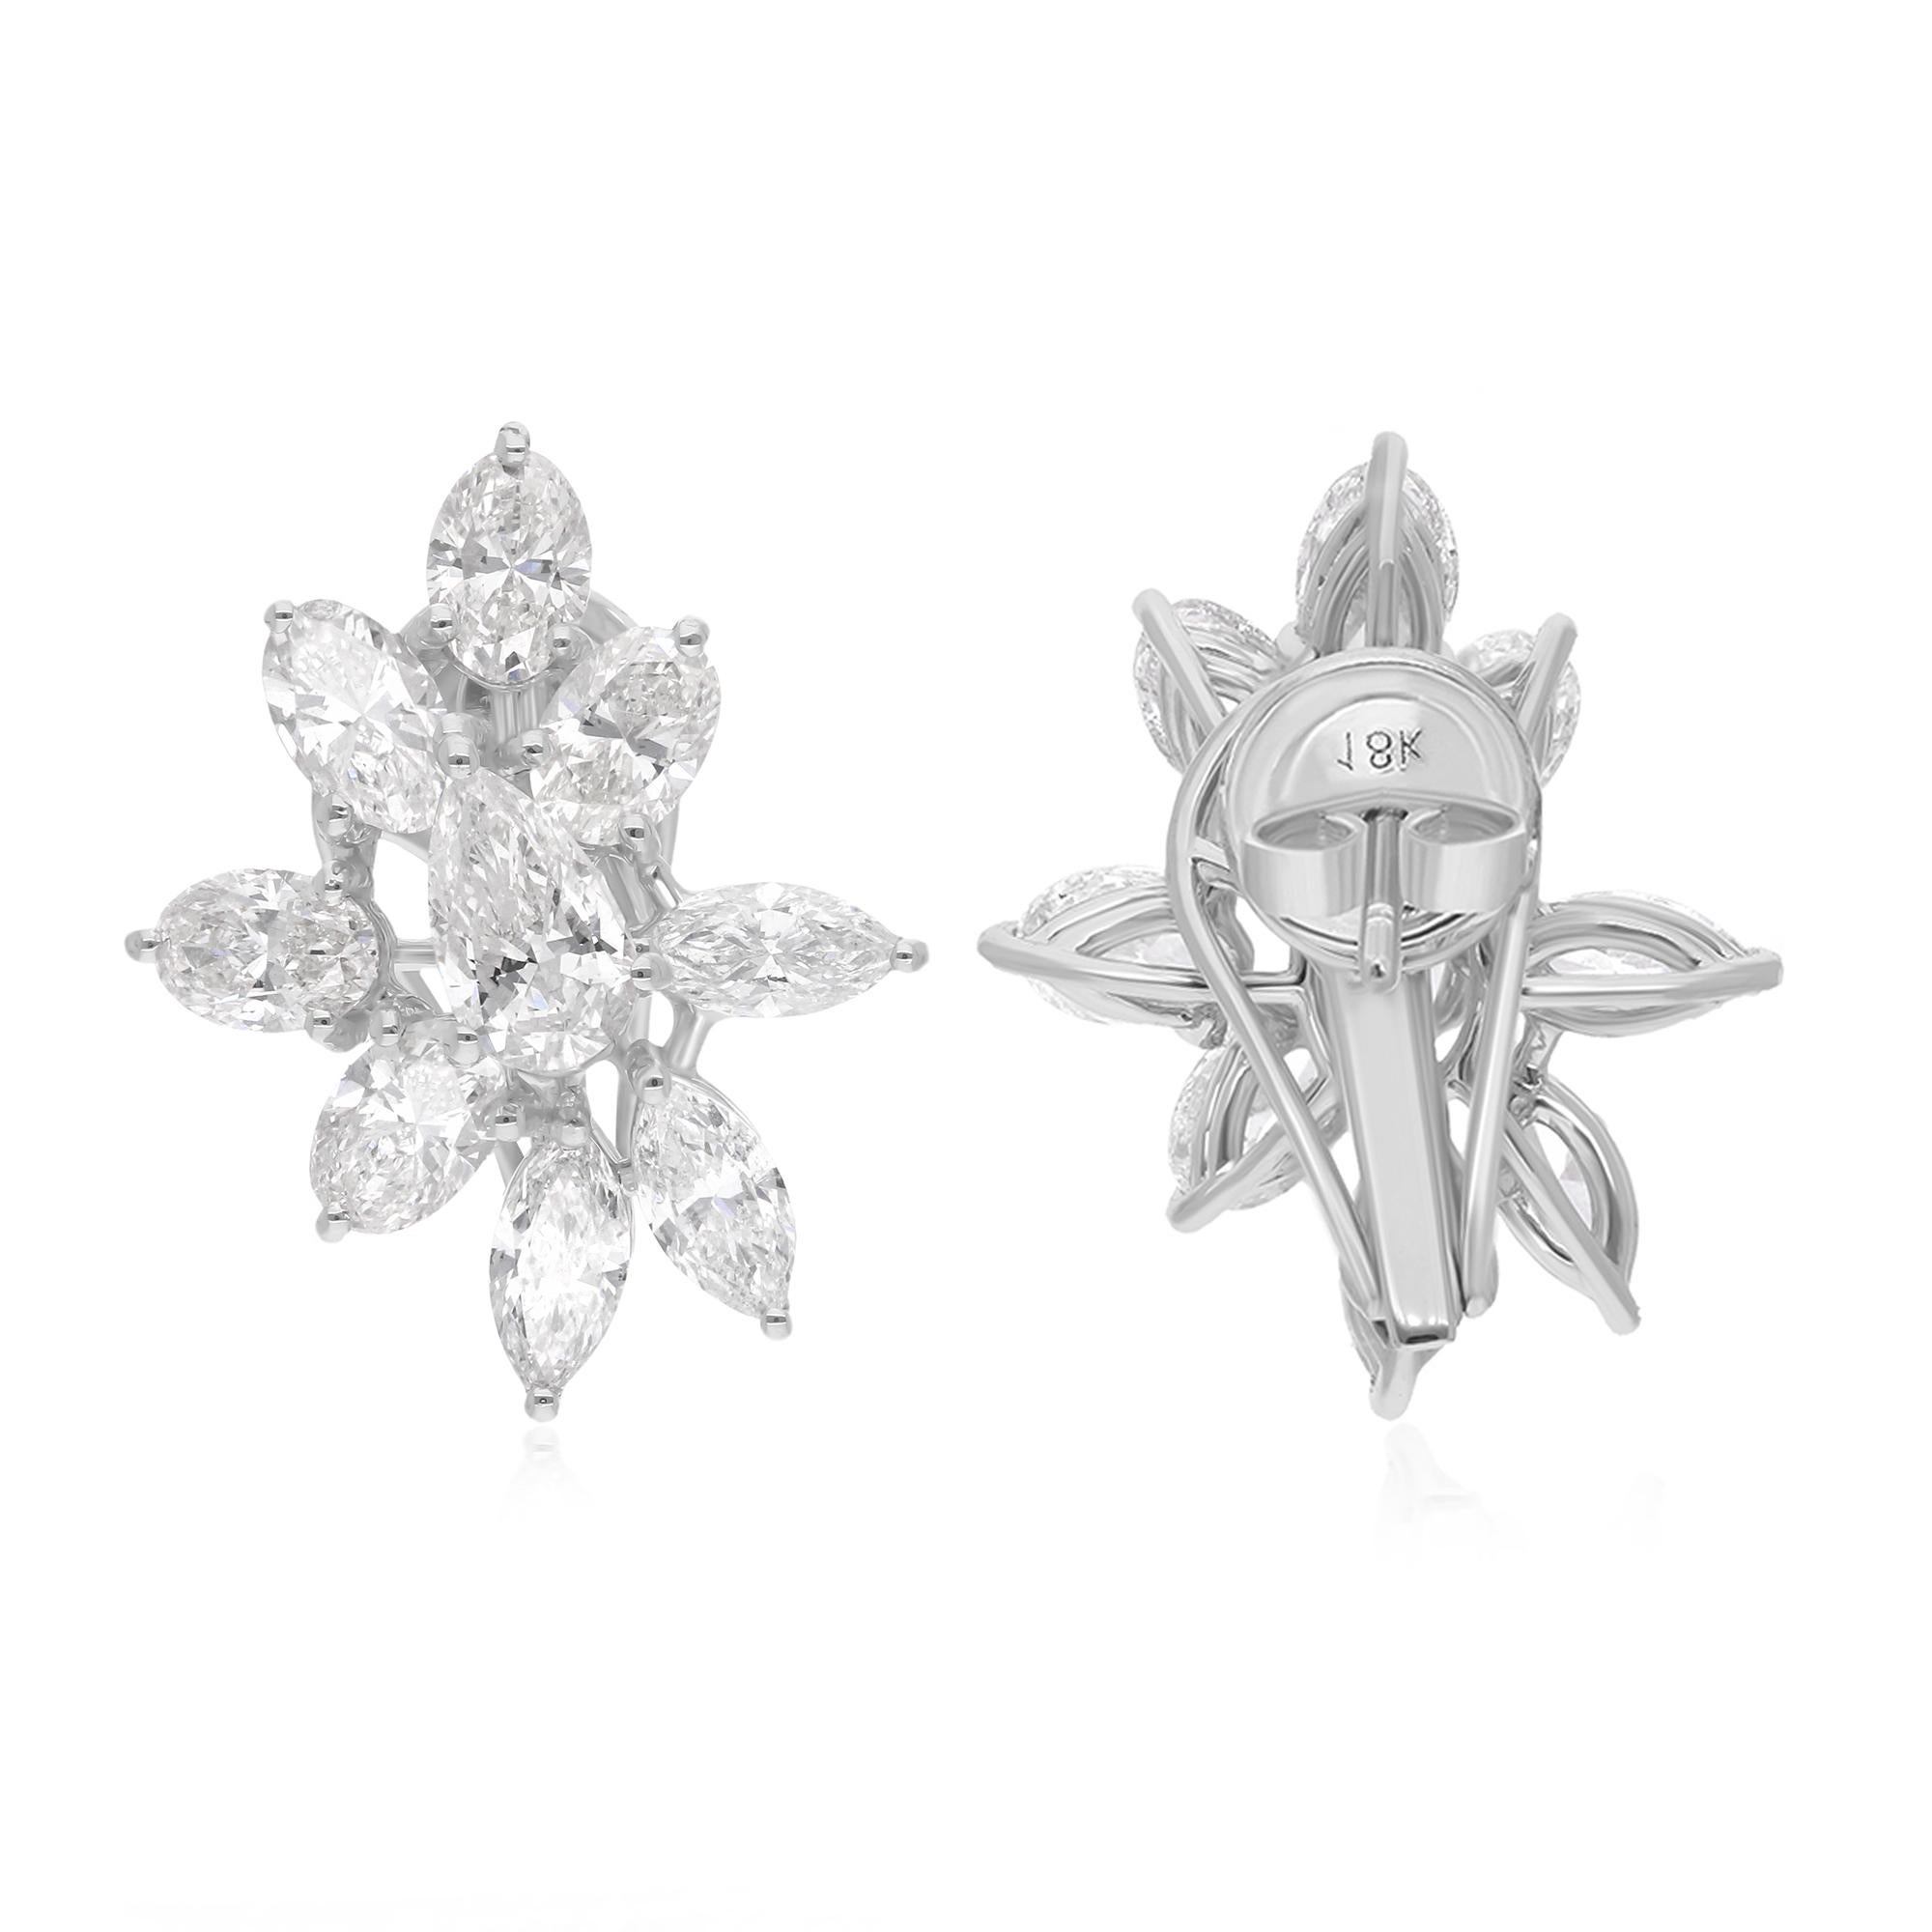 Each earring showcases a stunning marquise oval diamond, meticulously selected for its exceptional quality and brilliance. With a total carat weight of 5 carats, these diamonds radiate unparalleled sparkle and luminosity, capturing the light with